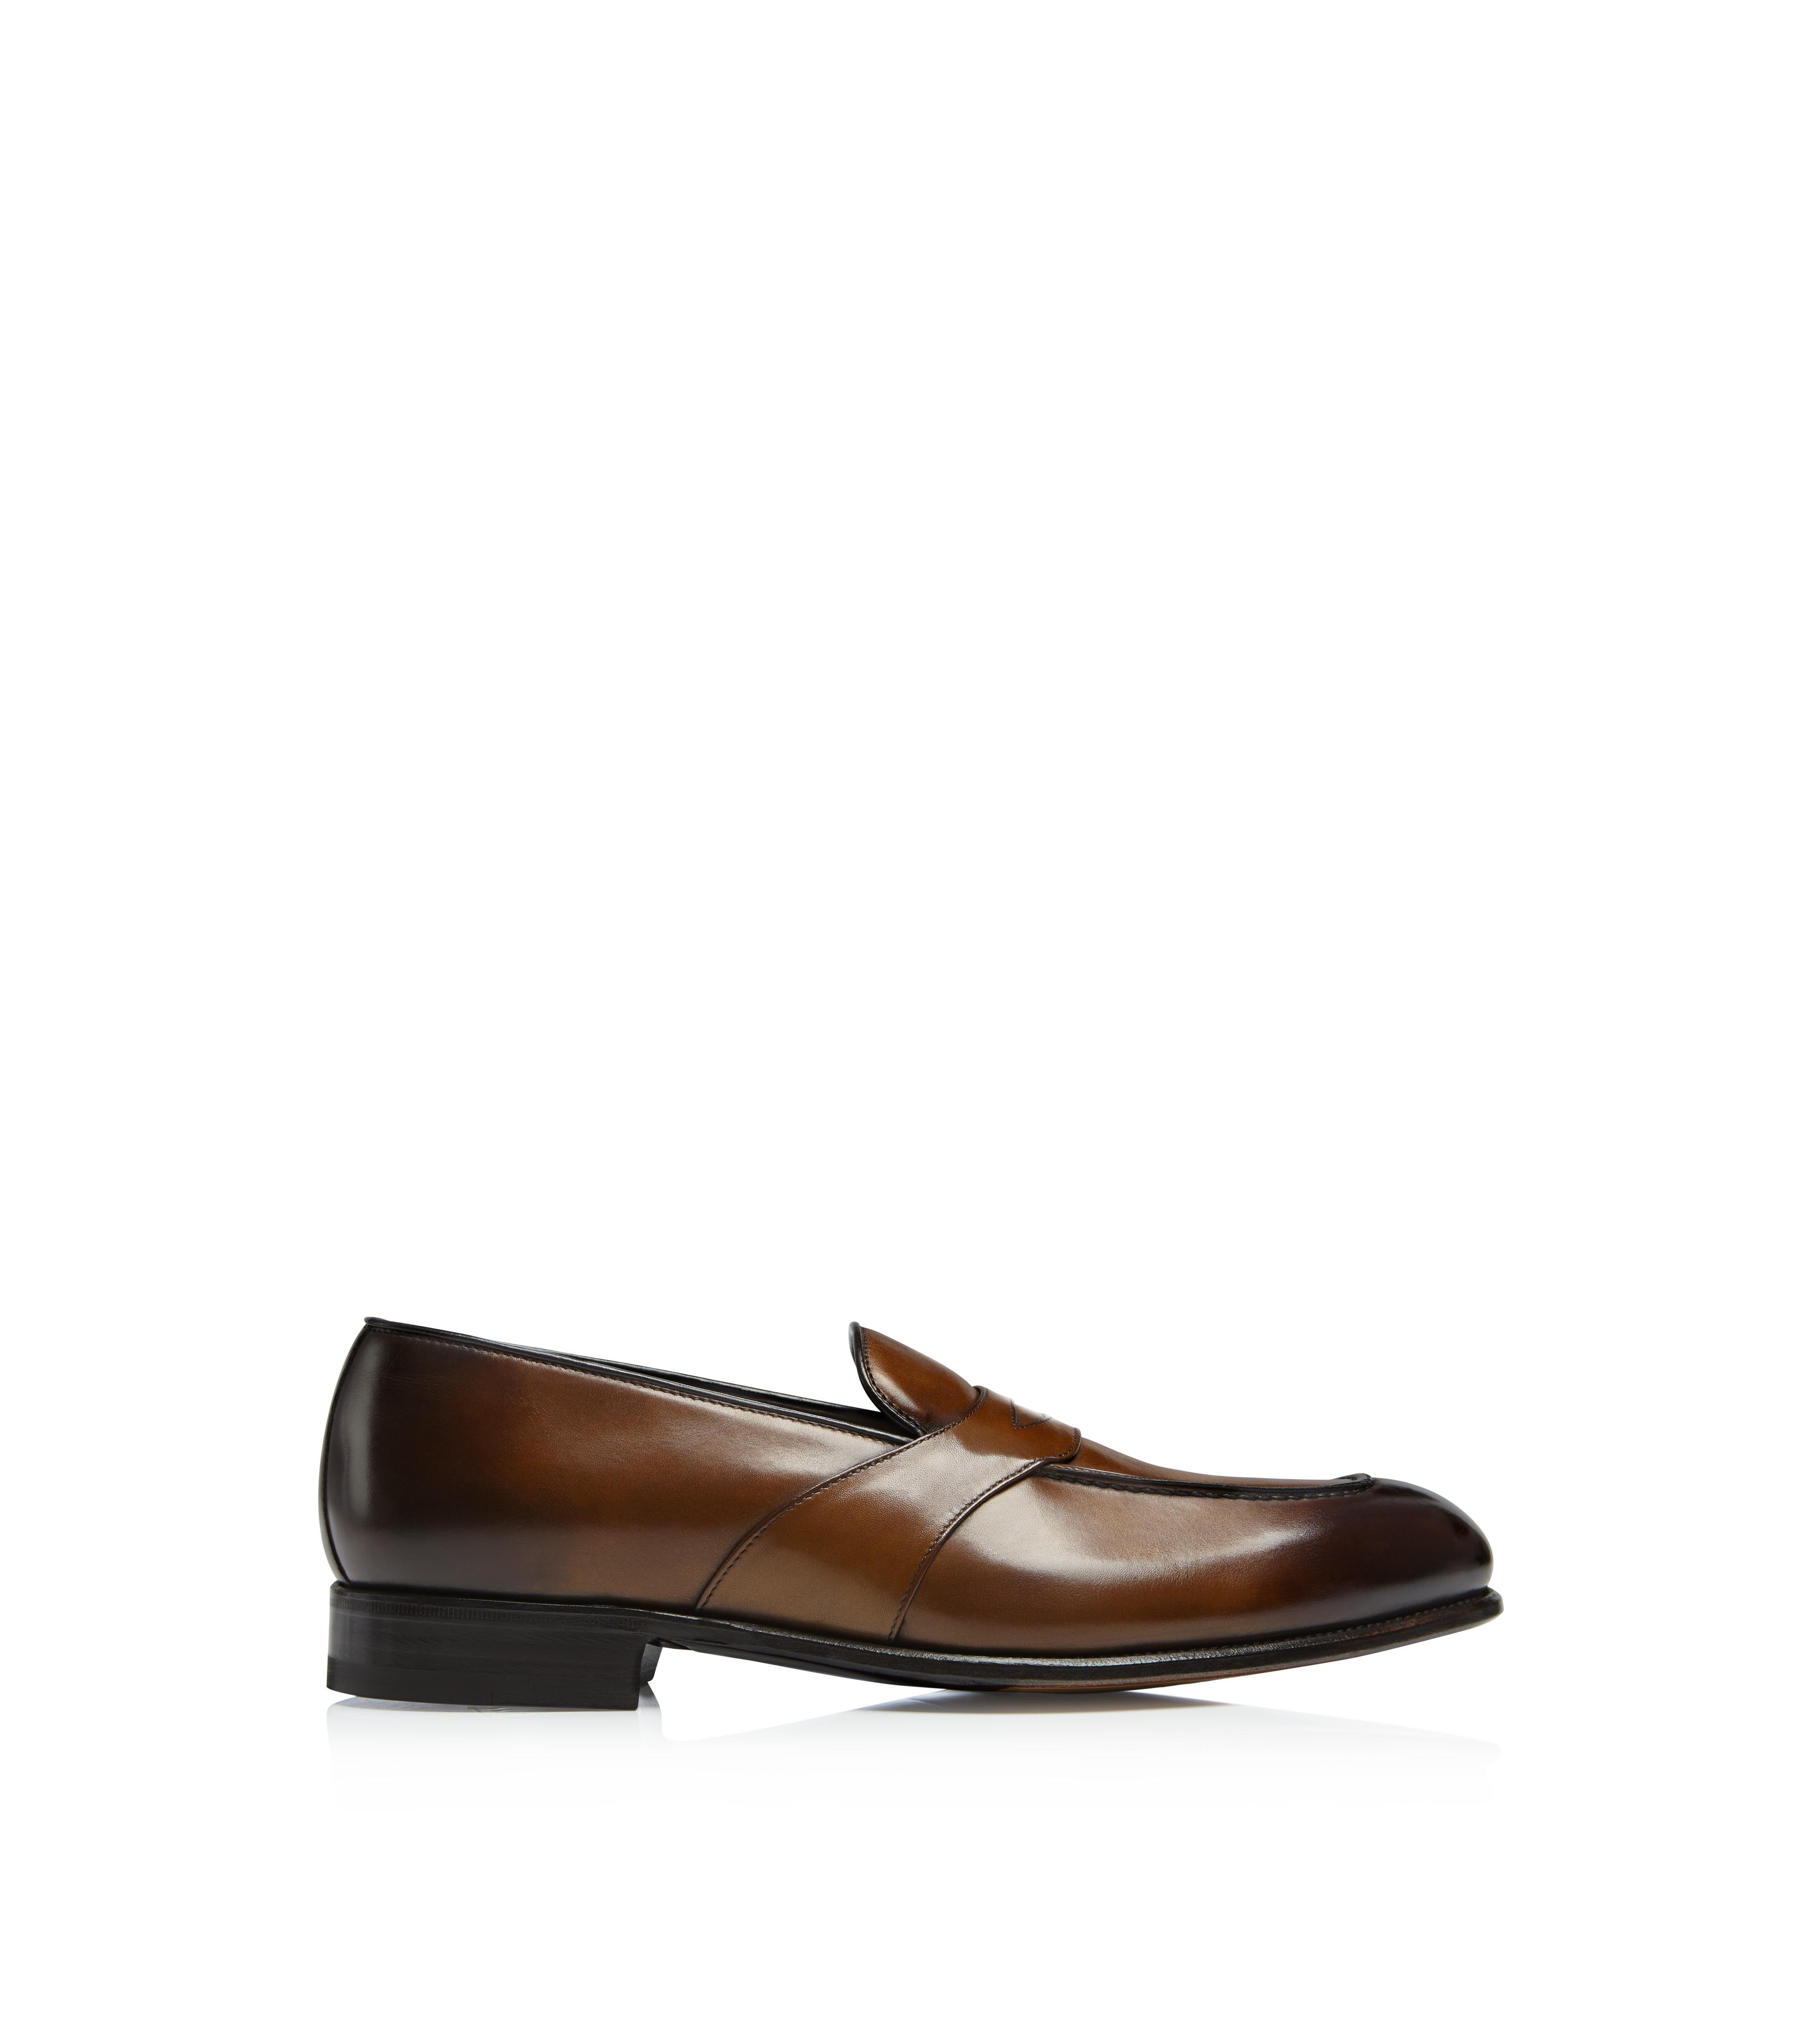 TOM FORD Mens Shoes